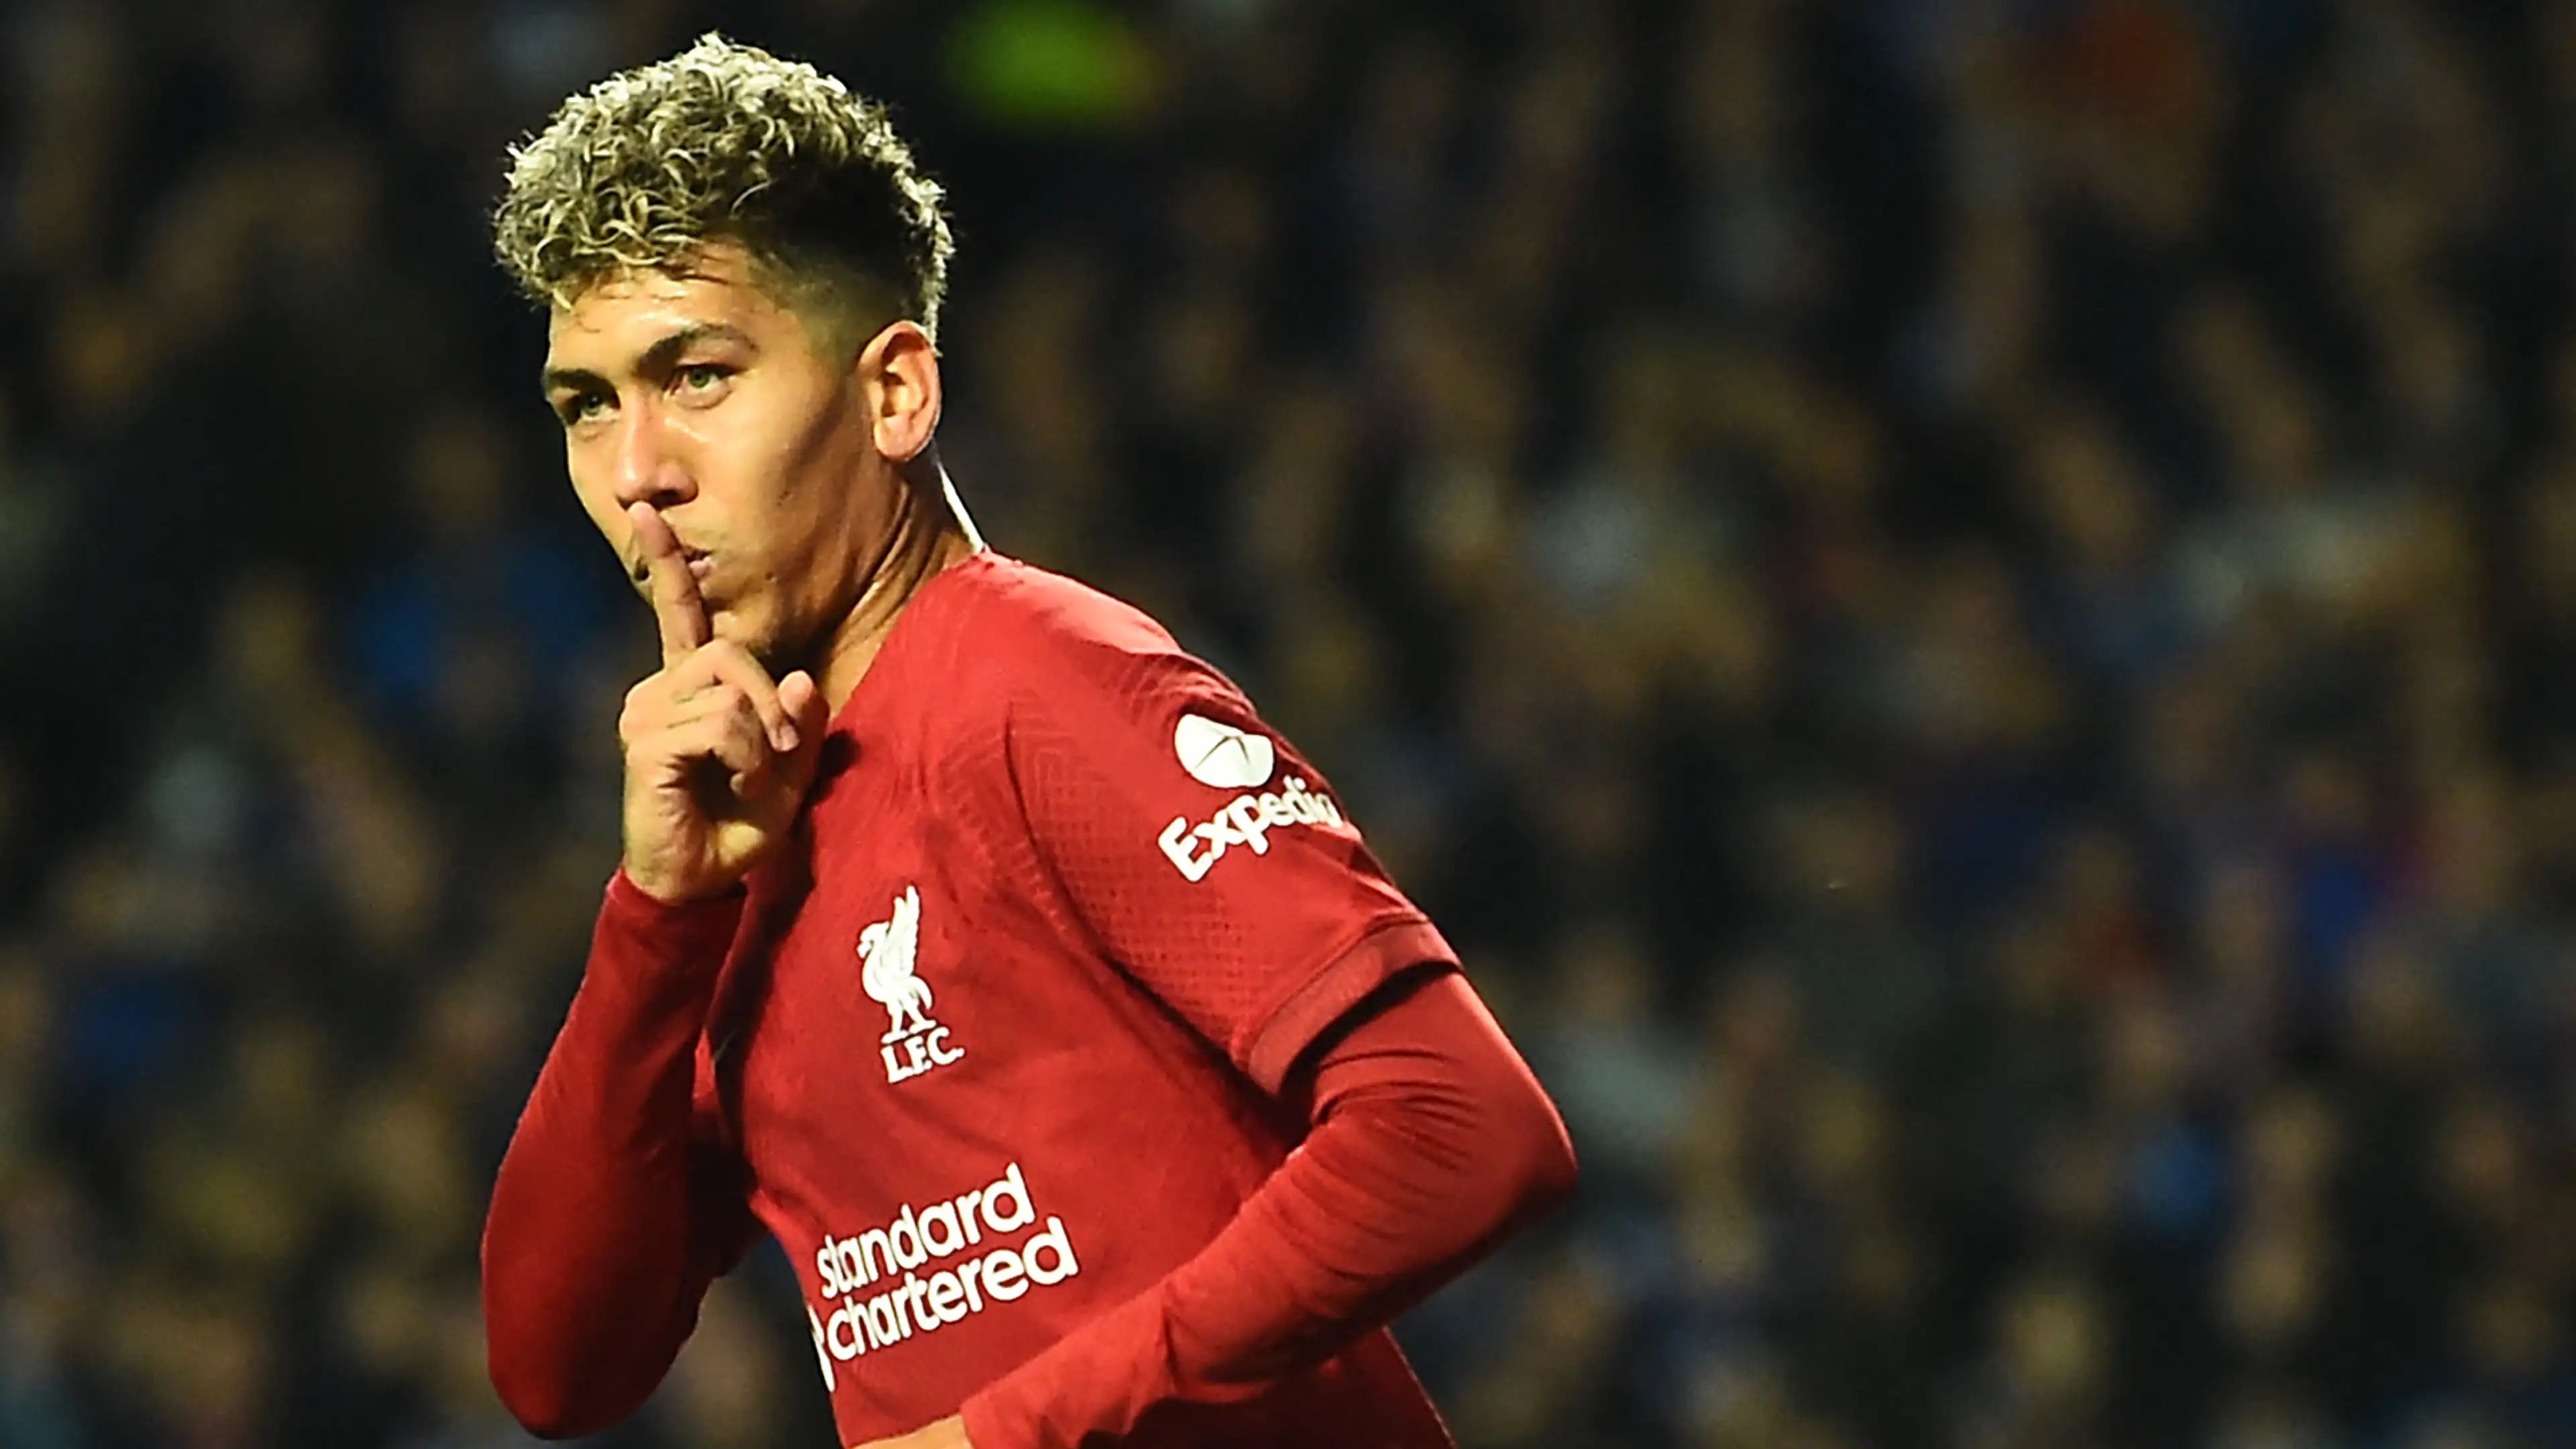 Firmino to leave Liverpool for Barcelona as free agent